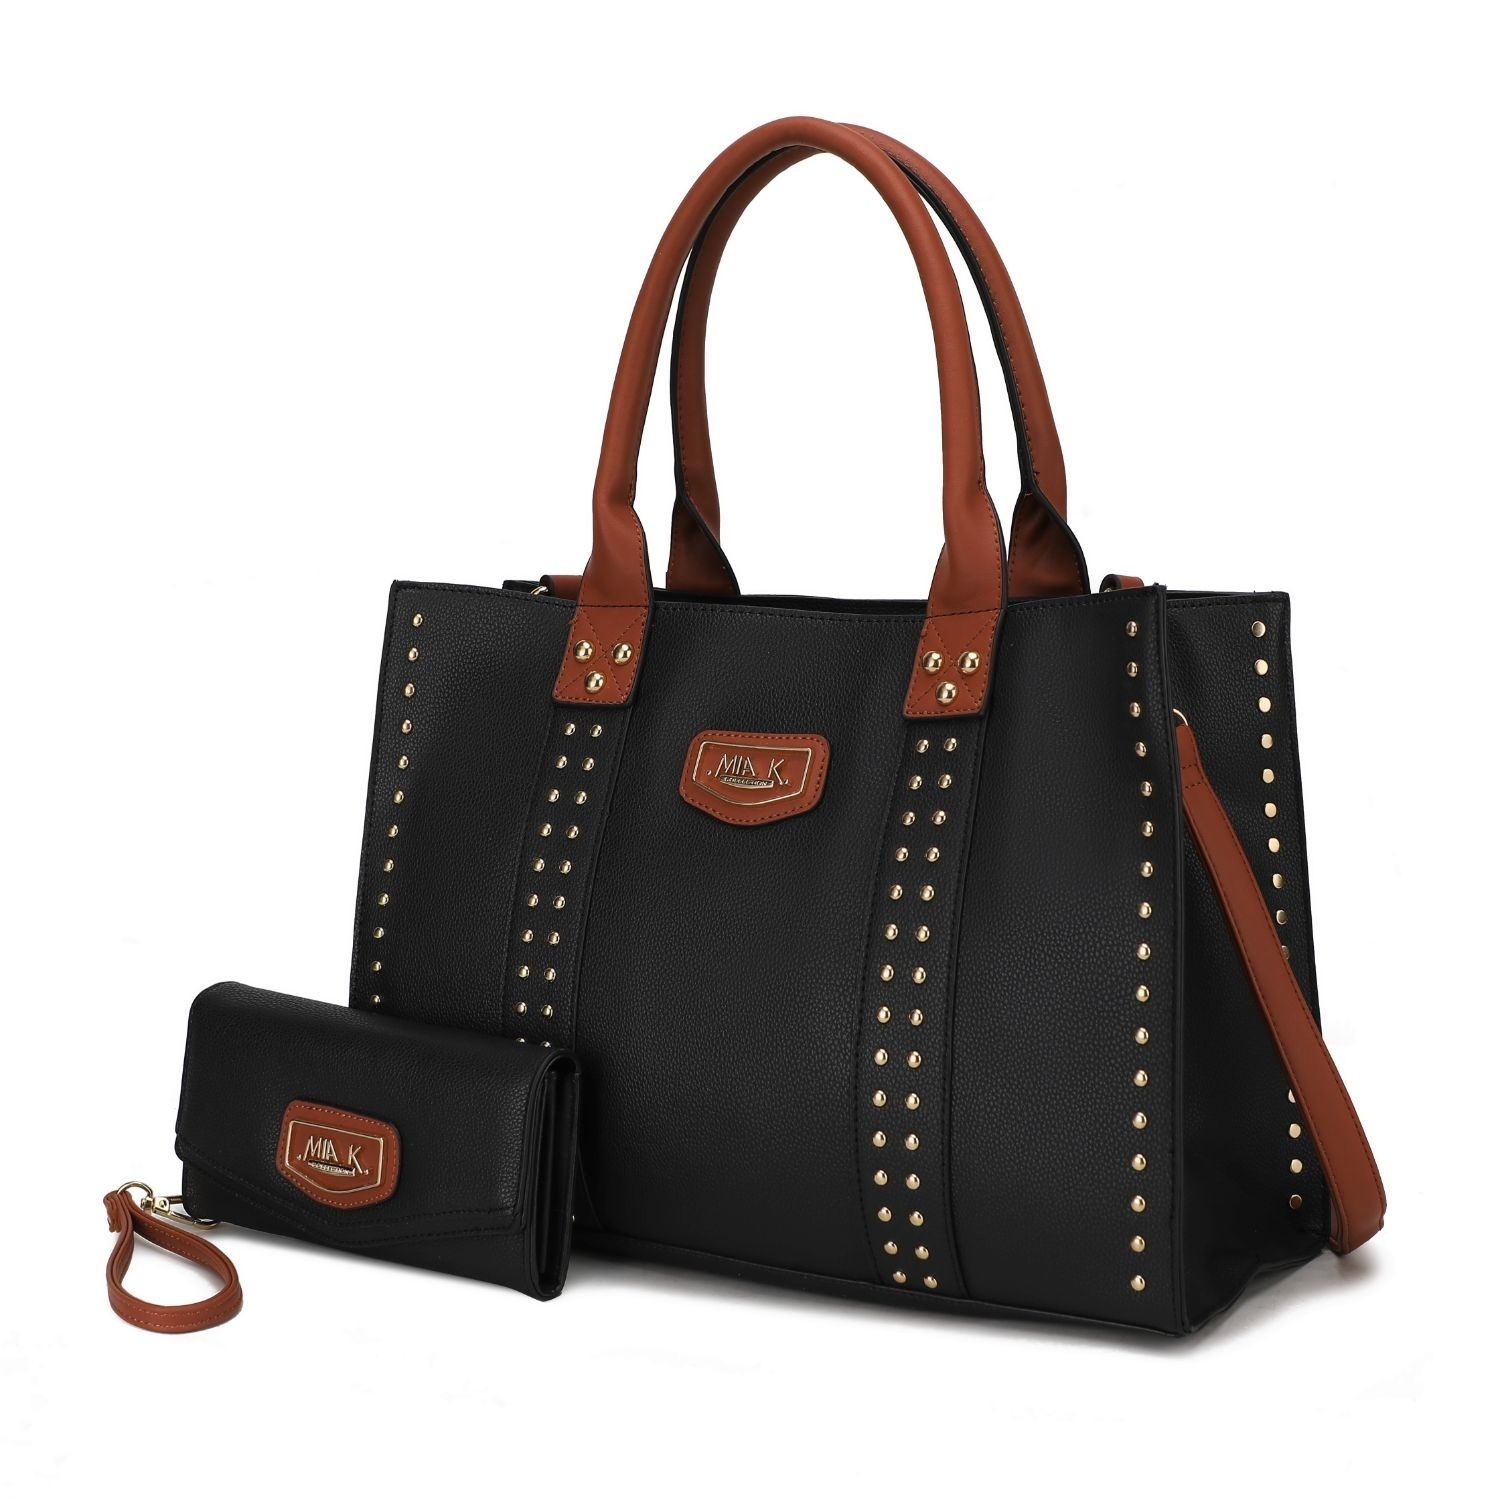 MKF Collection Davina Vegan Leather Women's Tote Bag By Mia K With Wallet -2 Pieces - Charcoal